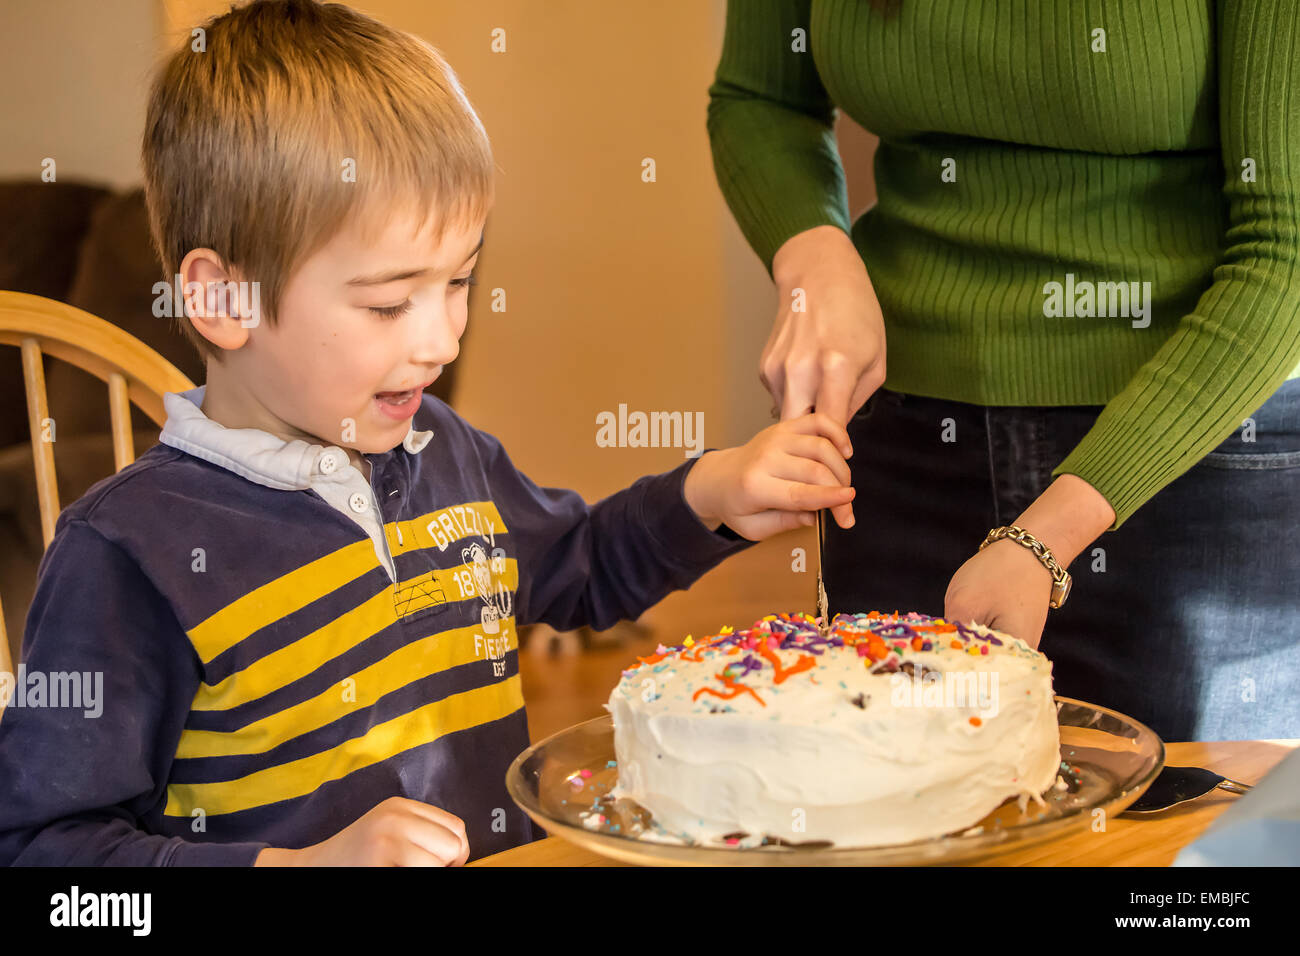 Seven year old boy helping his mother cut his birthday cake in Issaquah, Washington, USA Stock Photo